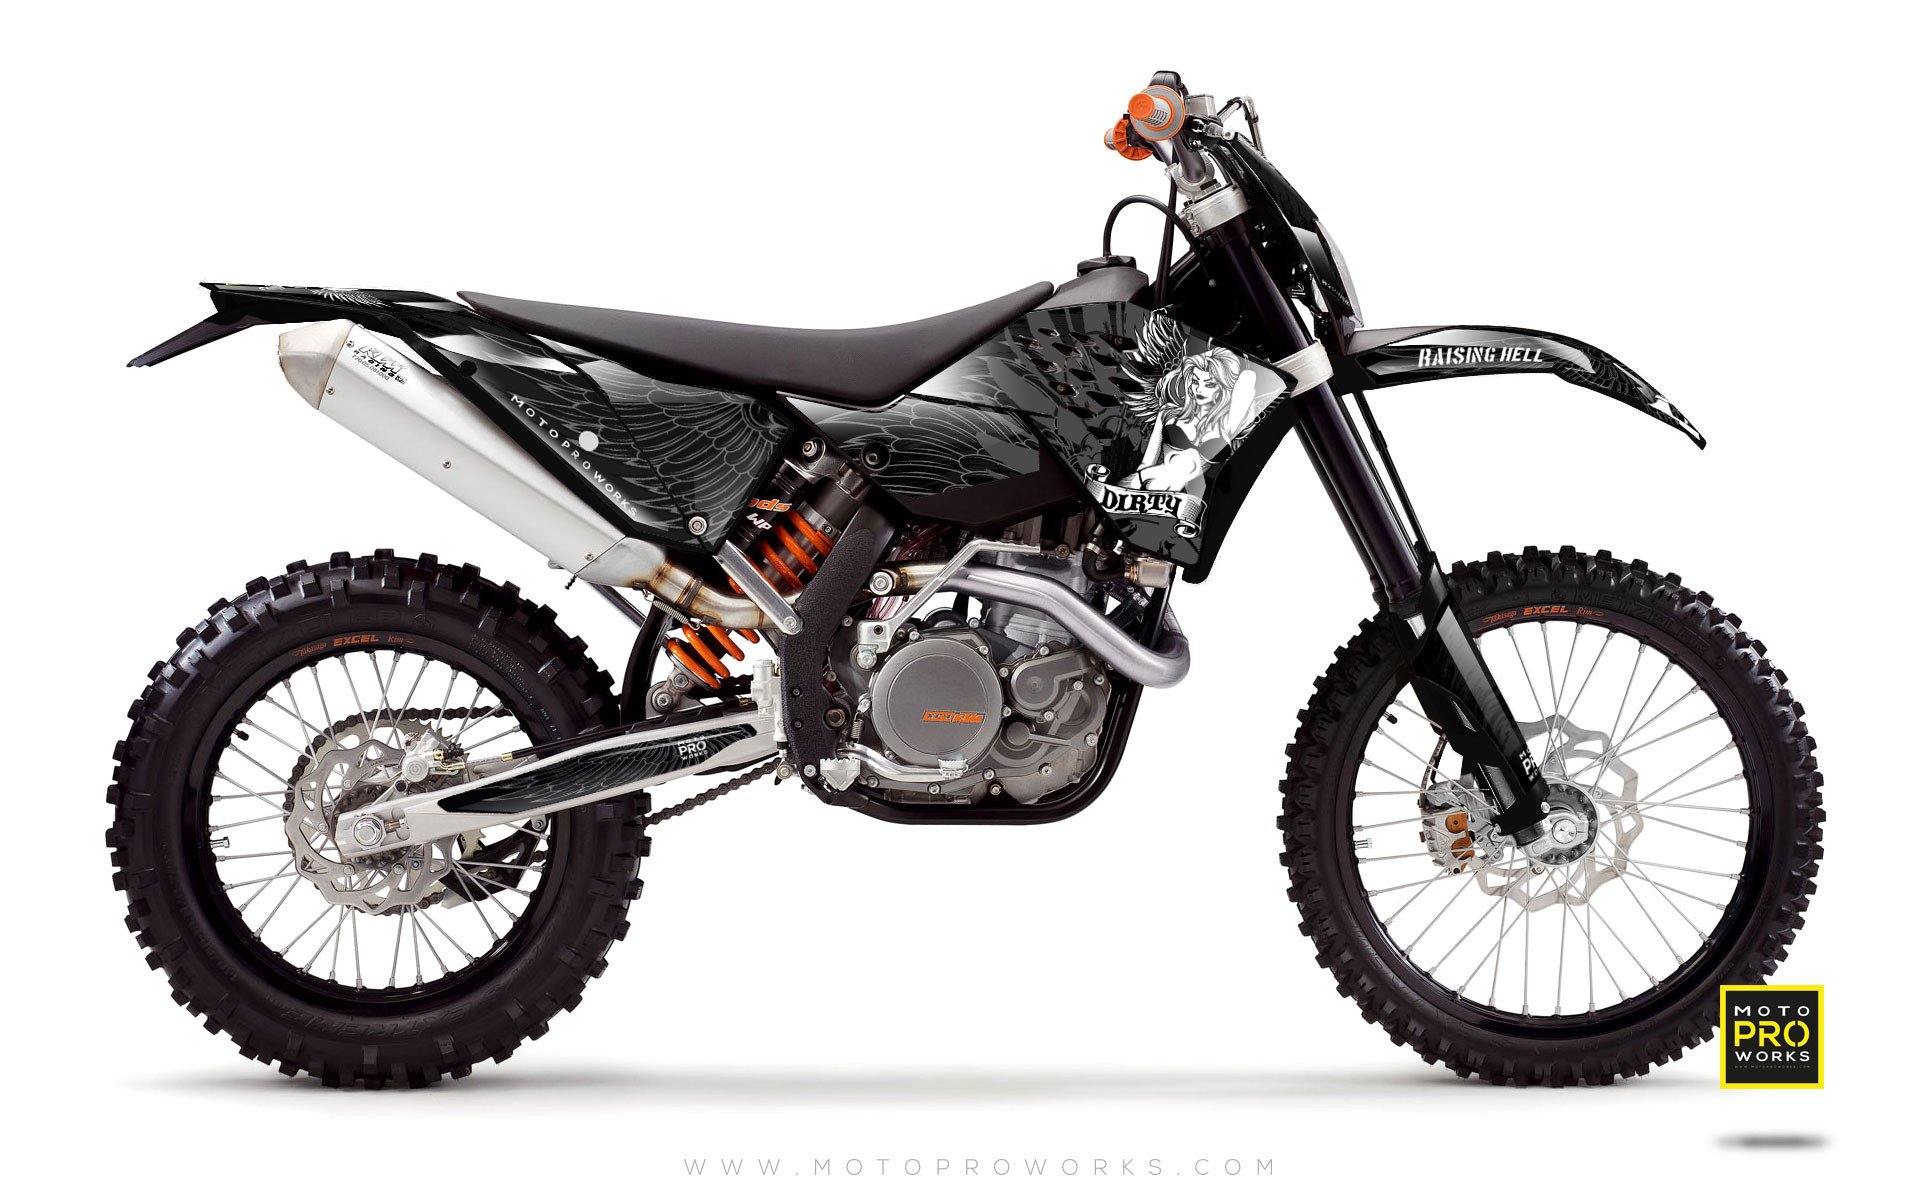 KTM GRAPHIC KIT - "Dirty Angel" (black) - MotoProWorks | Decals and Bike Graphic kit